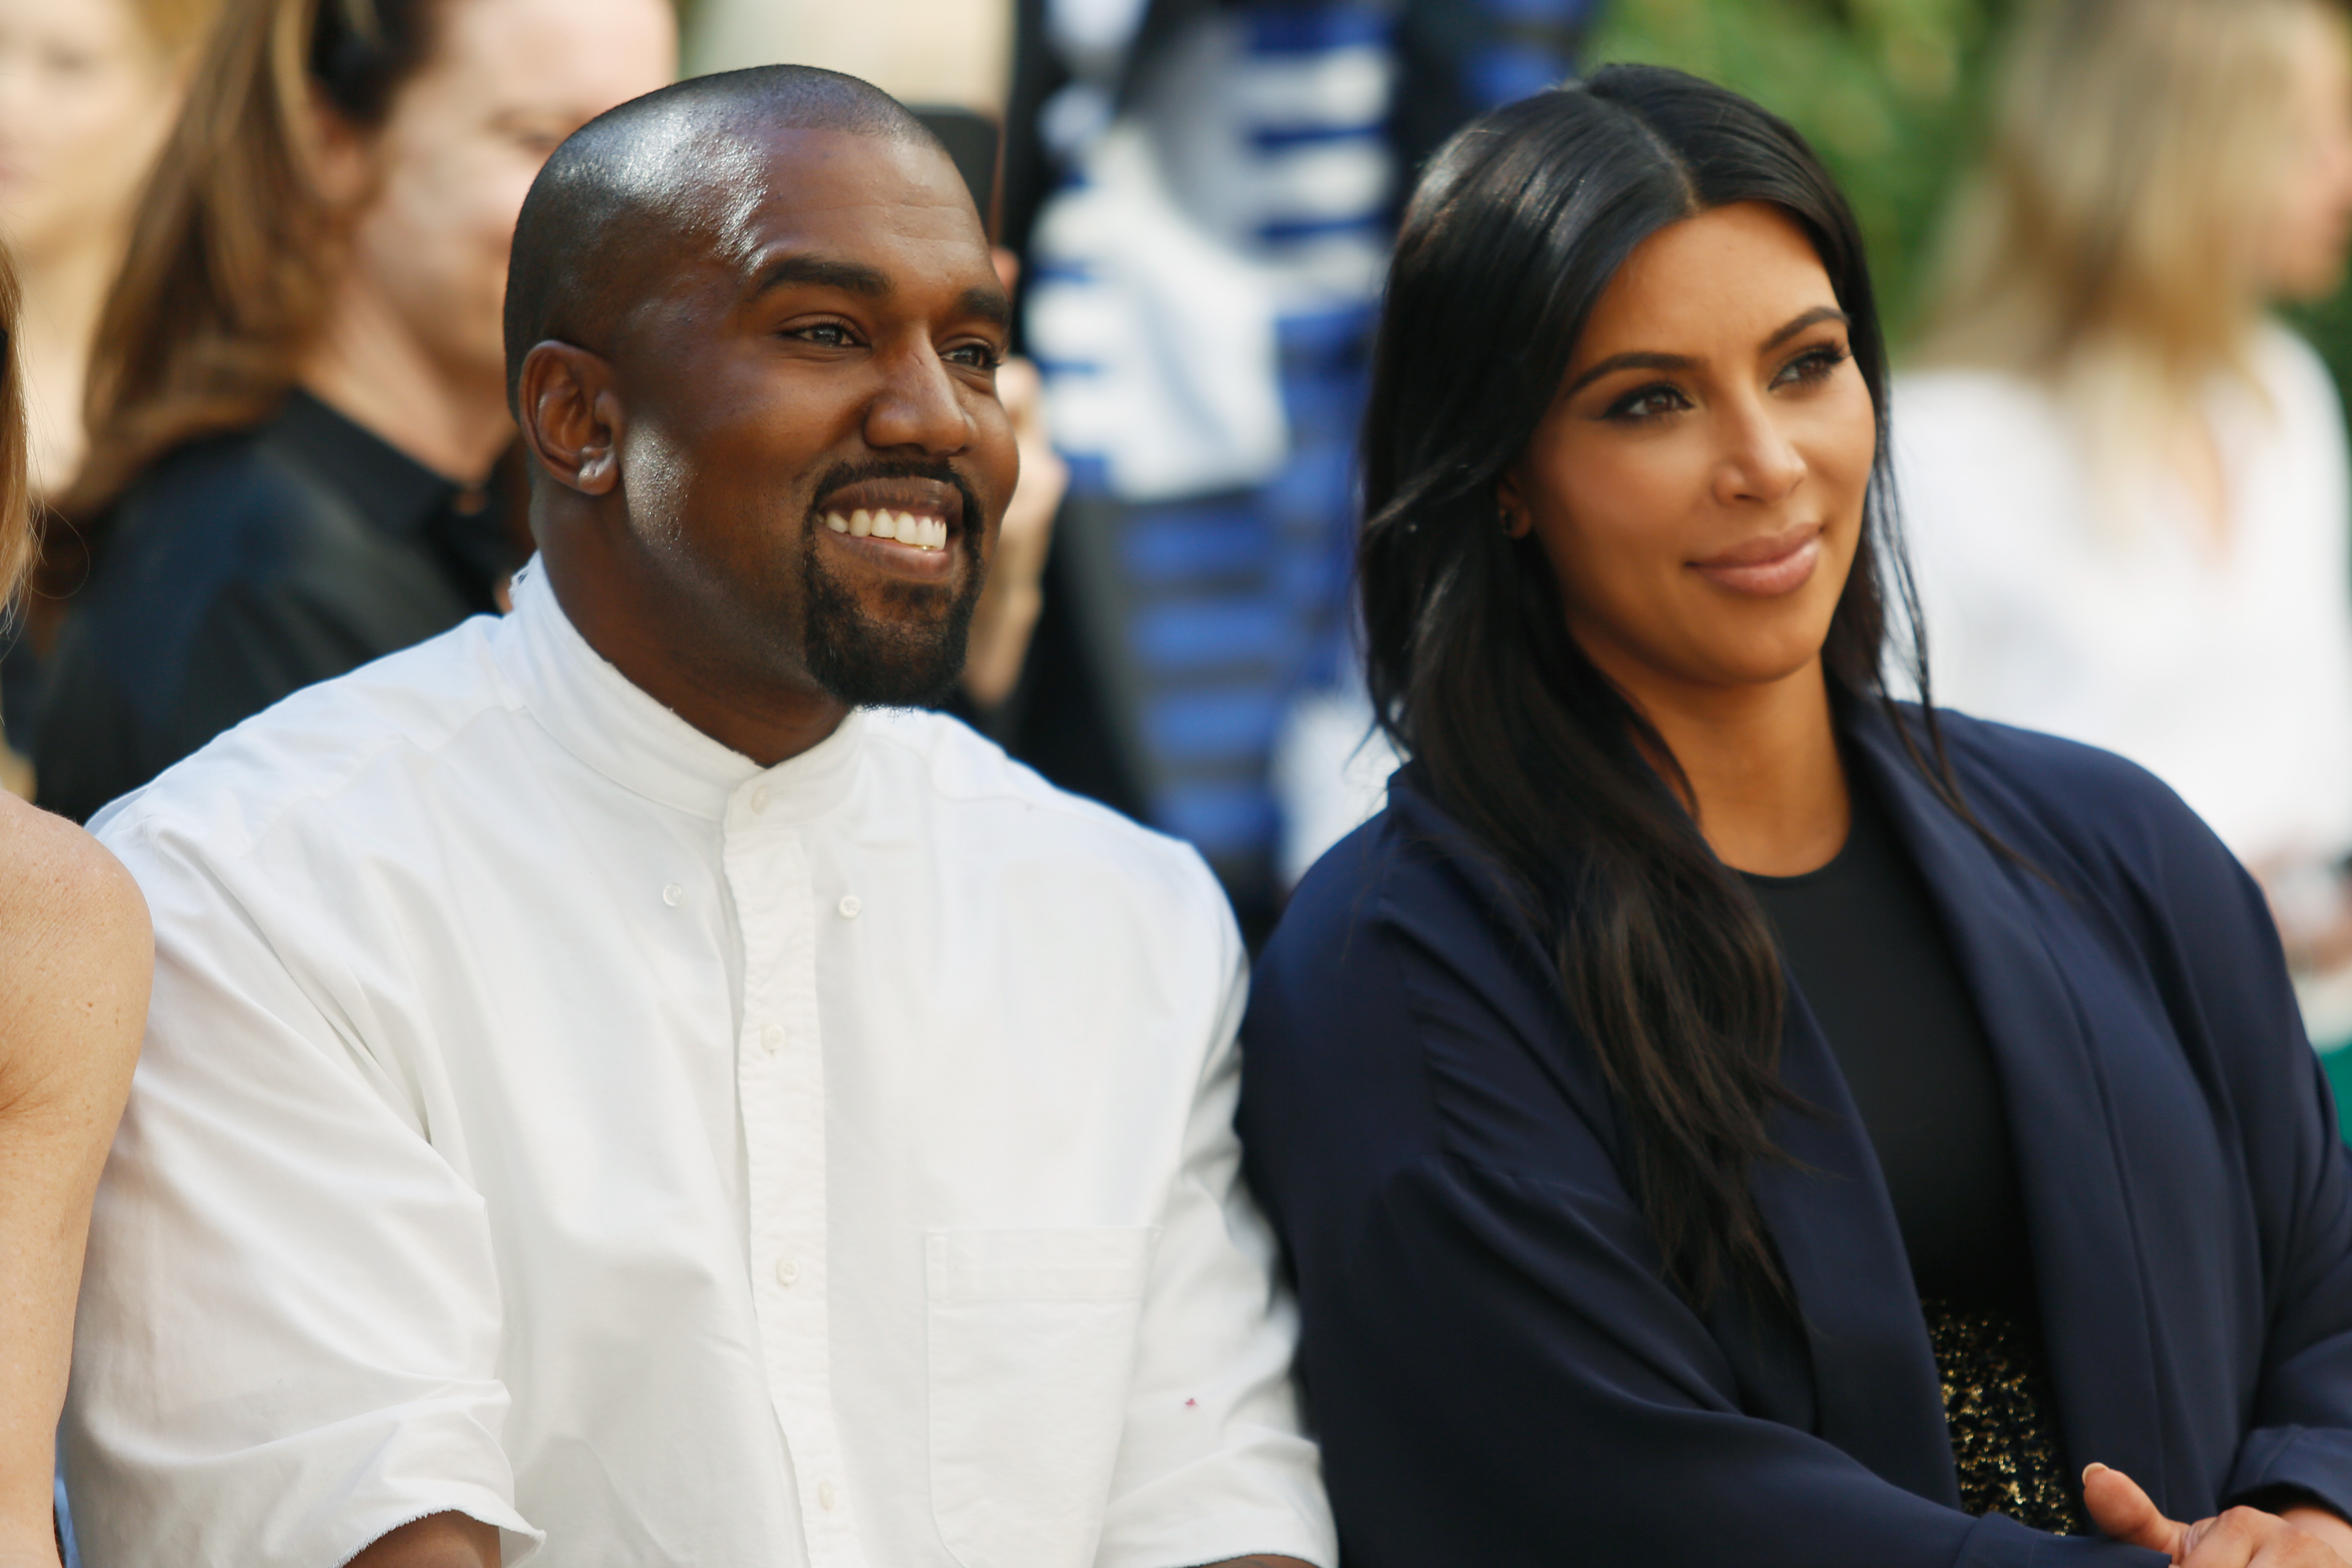 Kanye West and Kim Kardashian attend CFDA/Vogue Fashion Fund Show and Tea at Chateau Marmont in Los Angeles on Oct. 20, 2015. (Jeff Vespa—Getty Images)